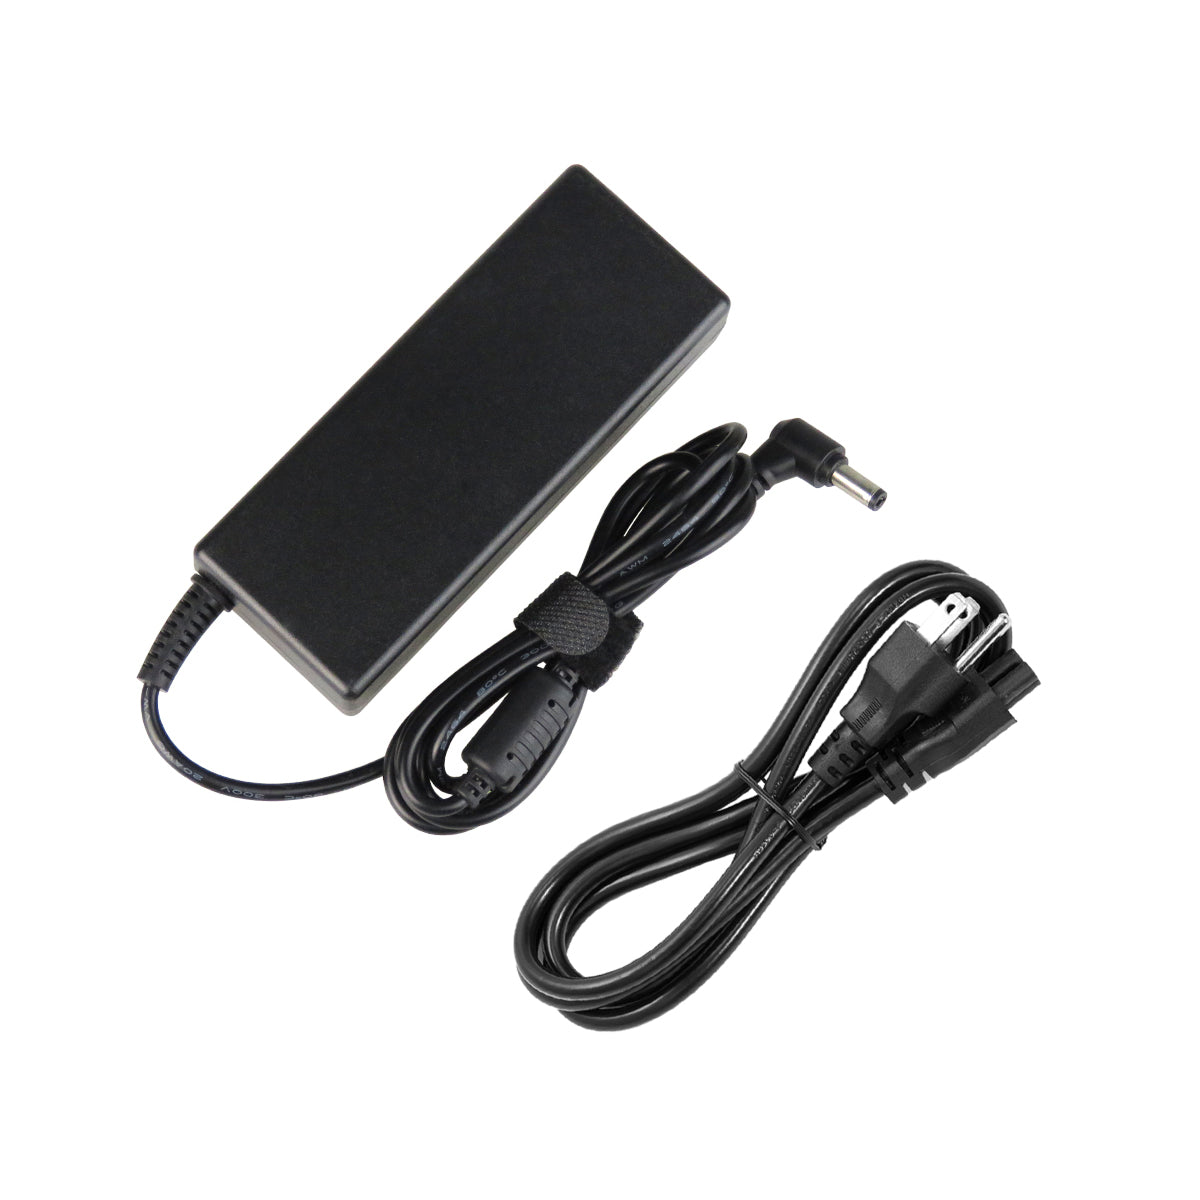 AC Adapter Charger for ASUS F81Se Notebook.